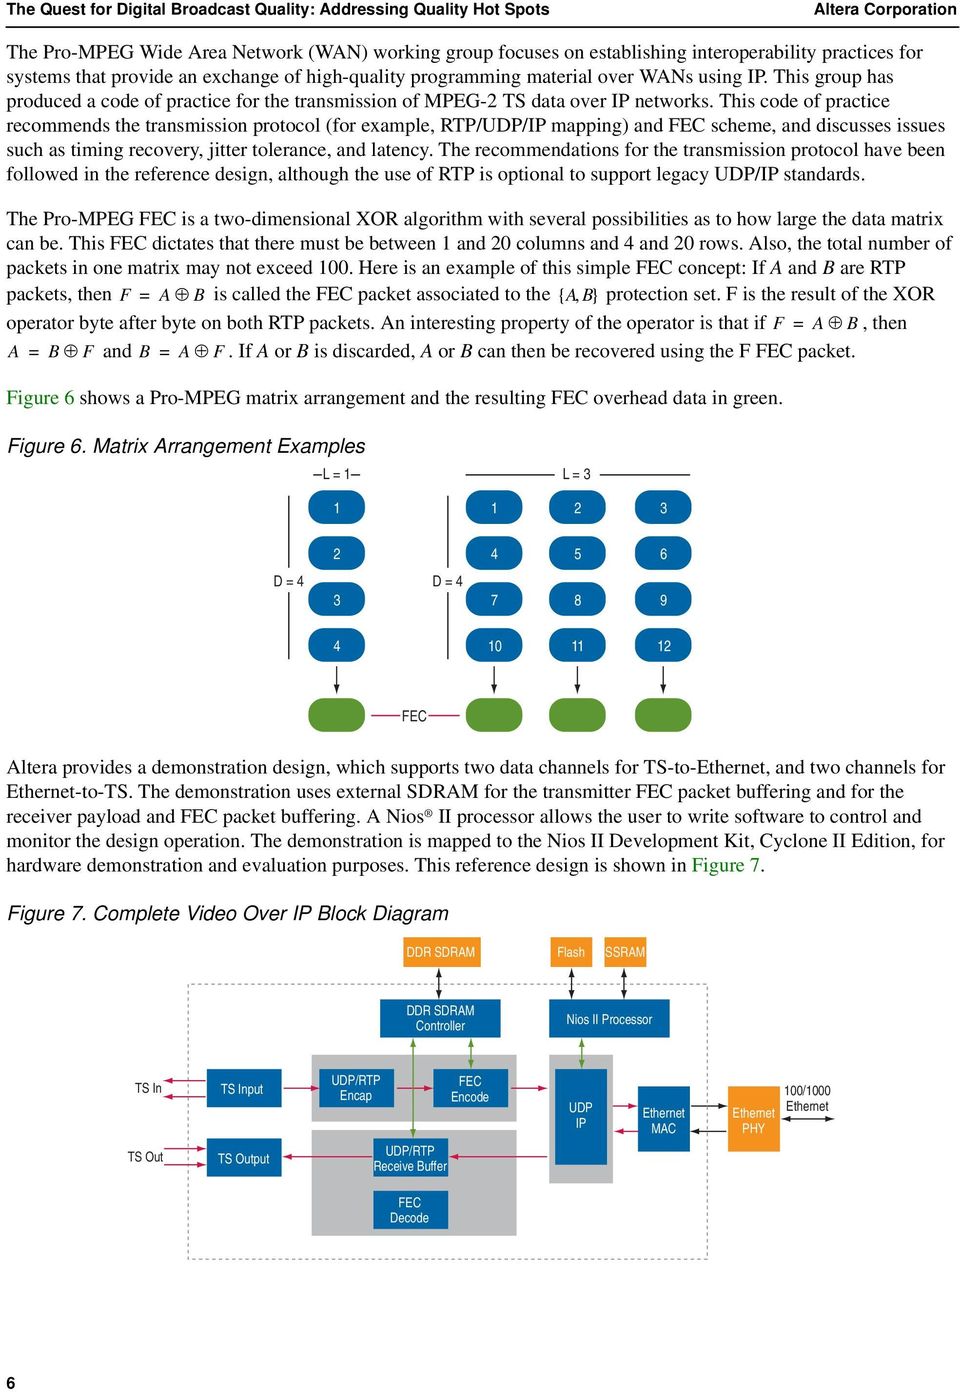 This code of practice recommends the transmission protocol (for example, RTP/UDP/IP mapping) and FEC scheme, and discusses issues such as timing recovery, jitter tolerance, and latency.